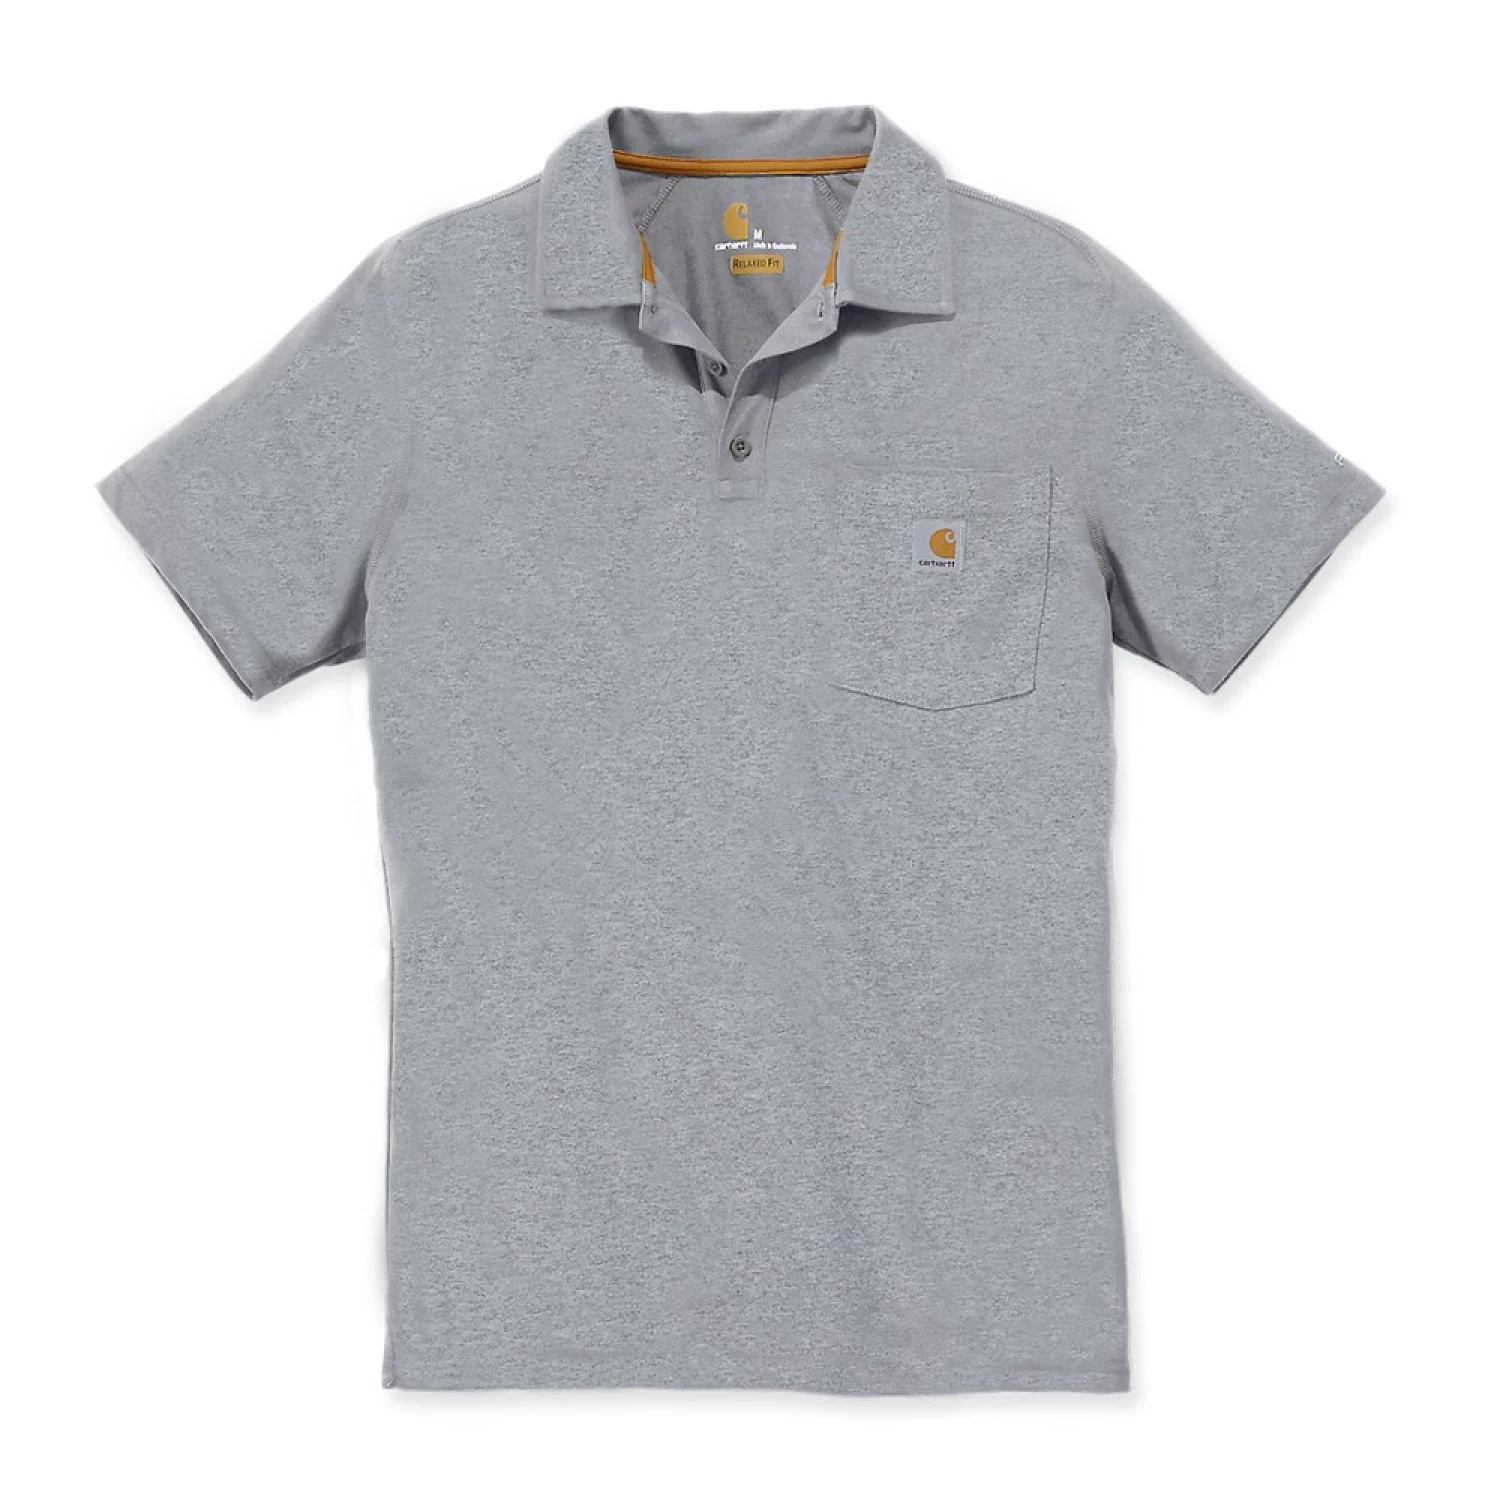 Carhartt 103569 Force Cotton Delmont Pocket Polo - Relaxed Fit - Heather Grey - M-image